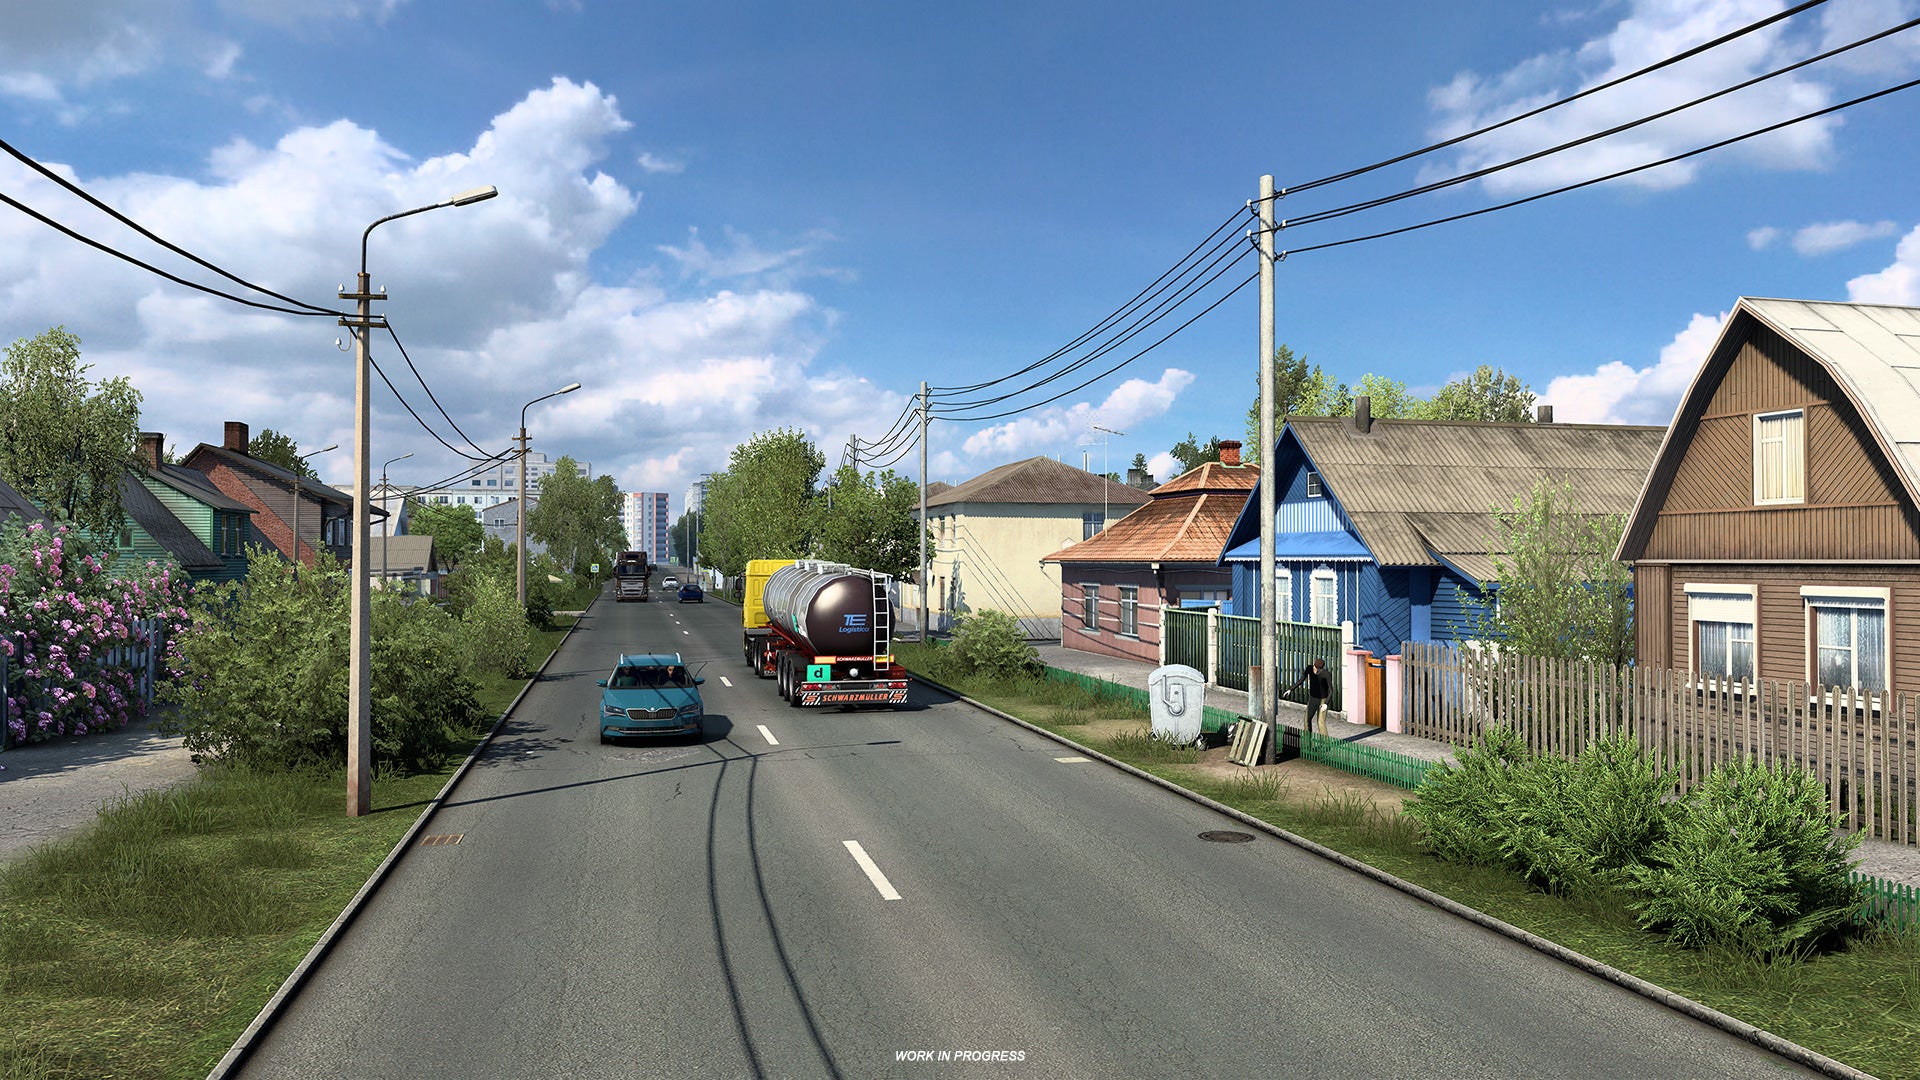 Euro Truck Sim 2 Russia - Trucks and cars drive on a two lane road between rows of colorful houses.